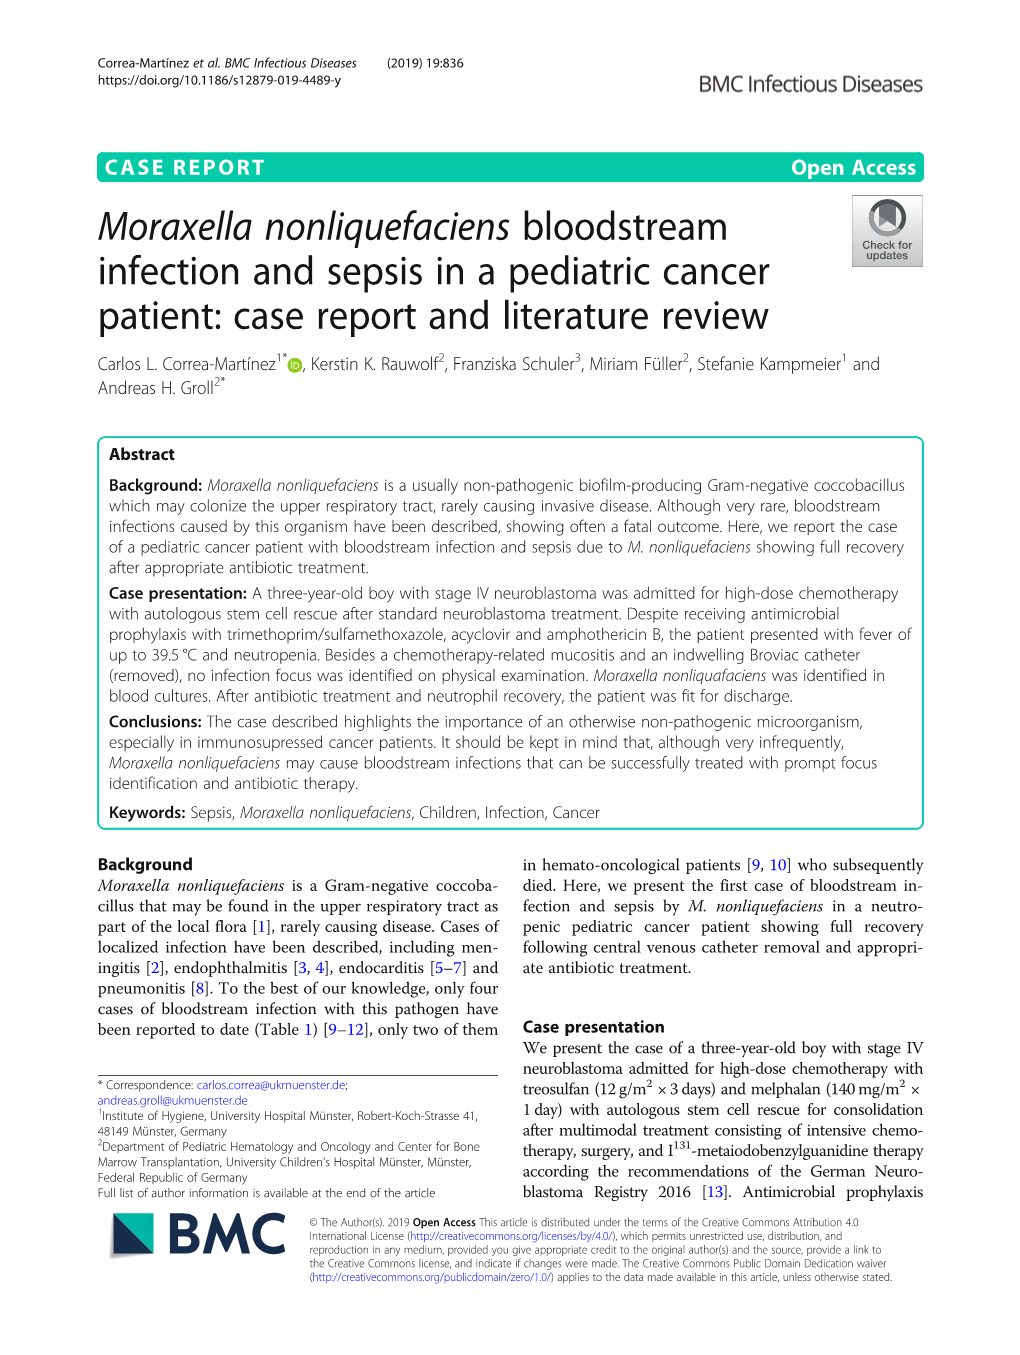 Moraxella Nonliquefaciens Bloodstream Infection and Sepsis in a Pediatric Cancer Patient: Case Report and Literature Review Carlos L